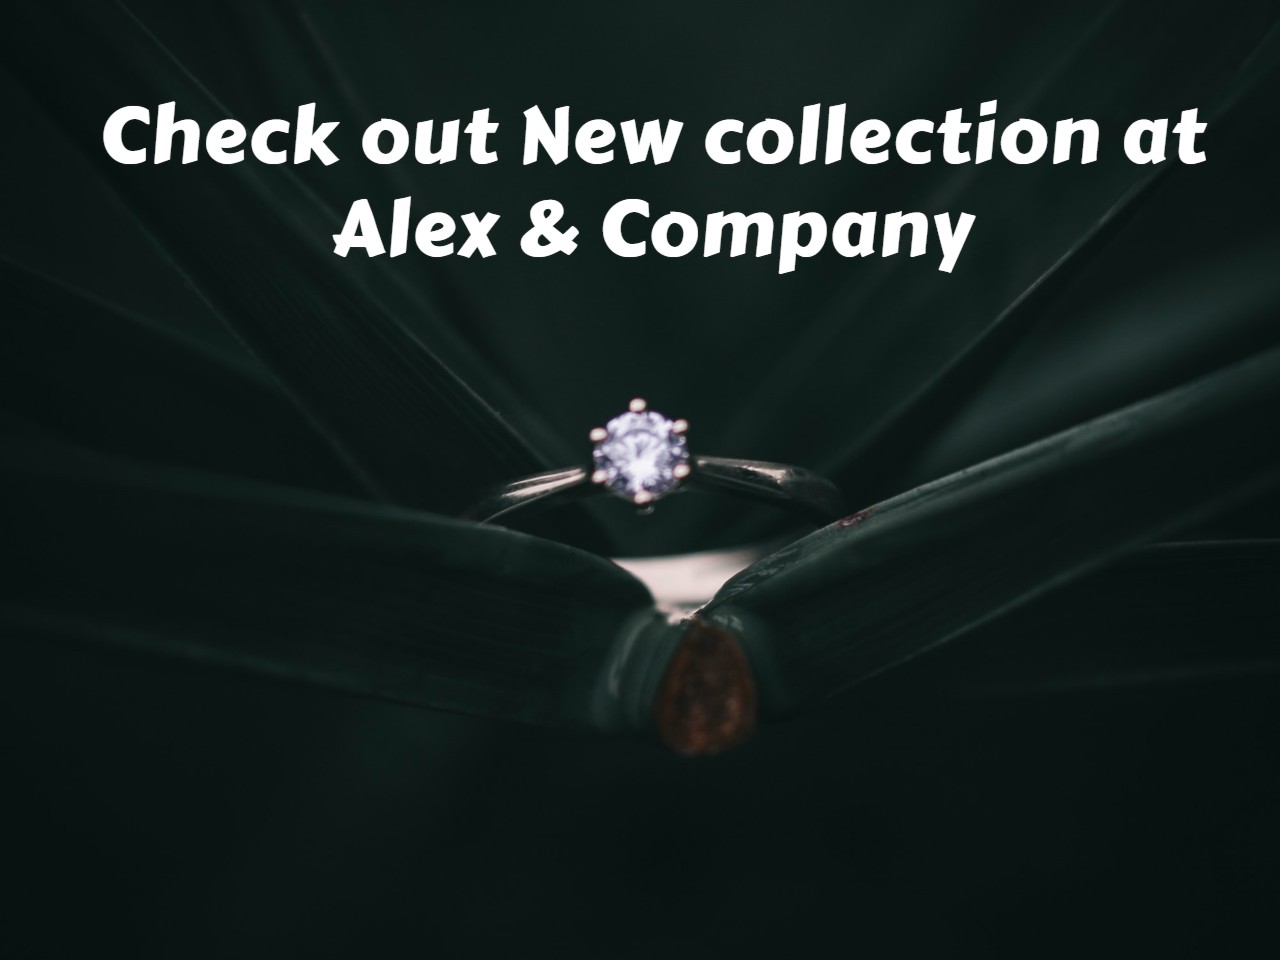 Check out New collection at Alex & Company